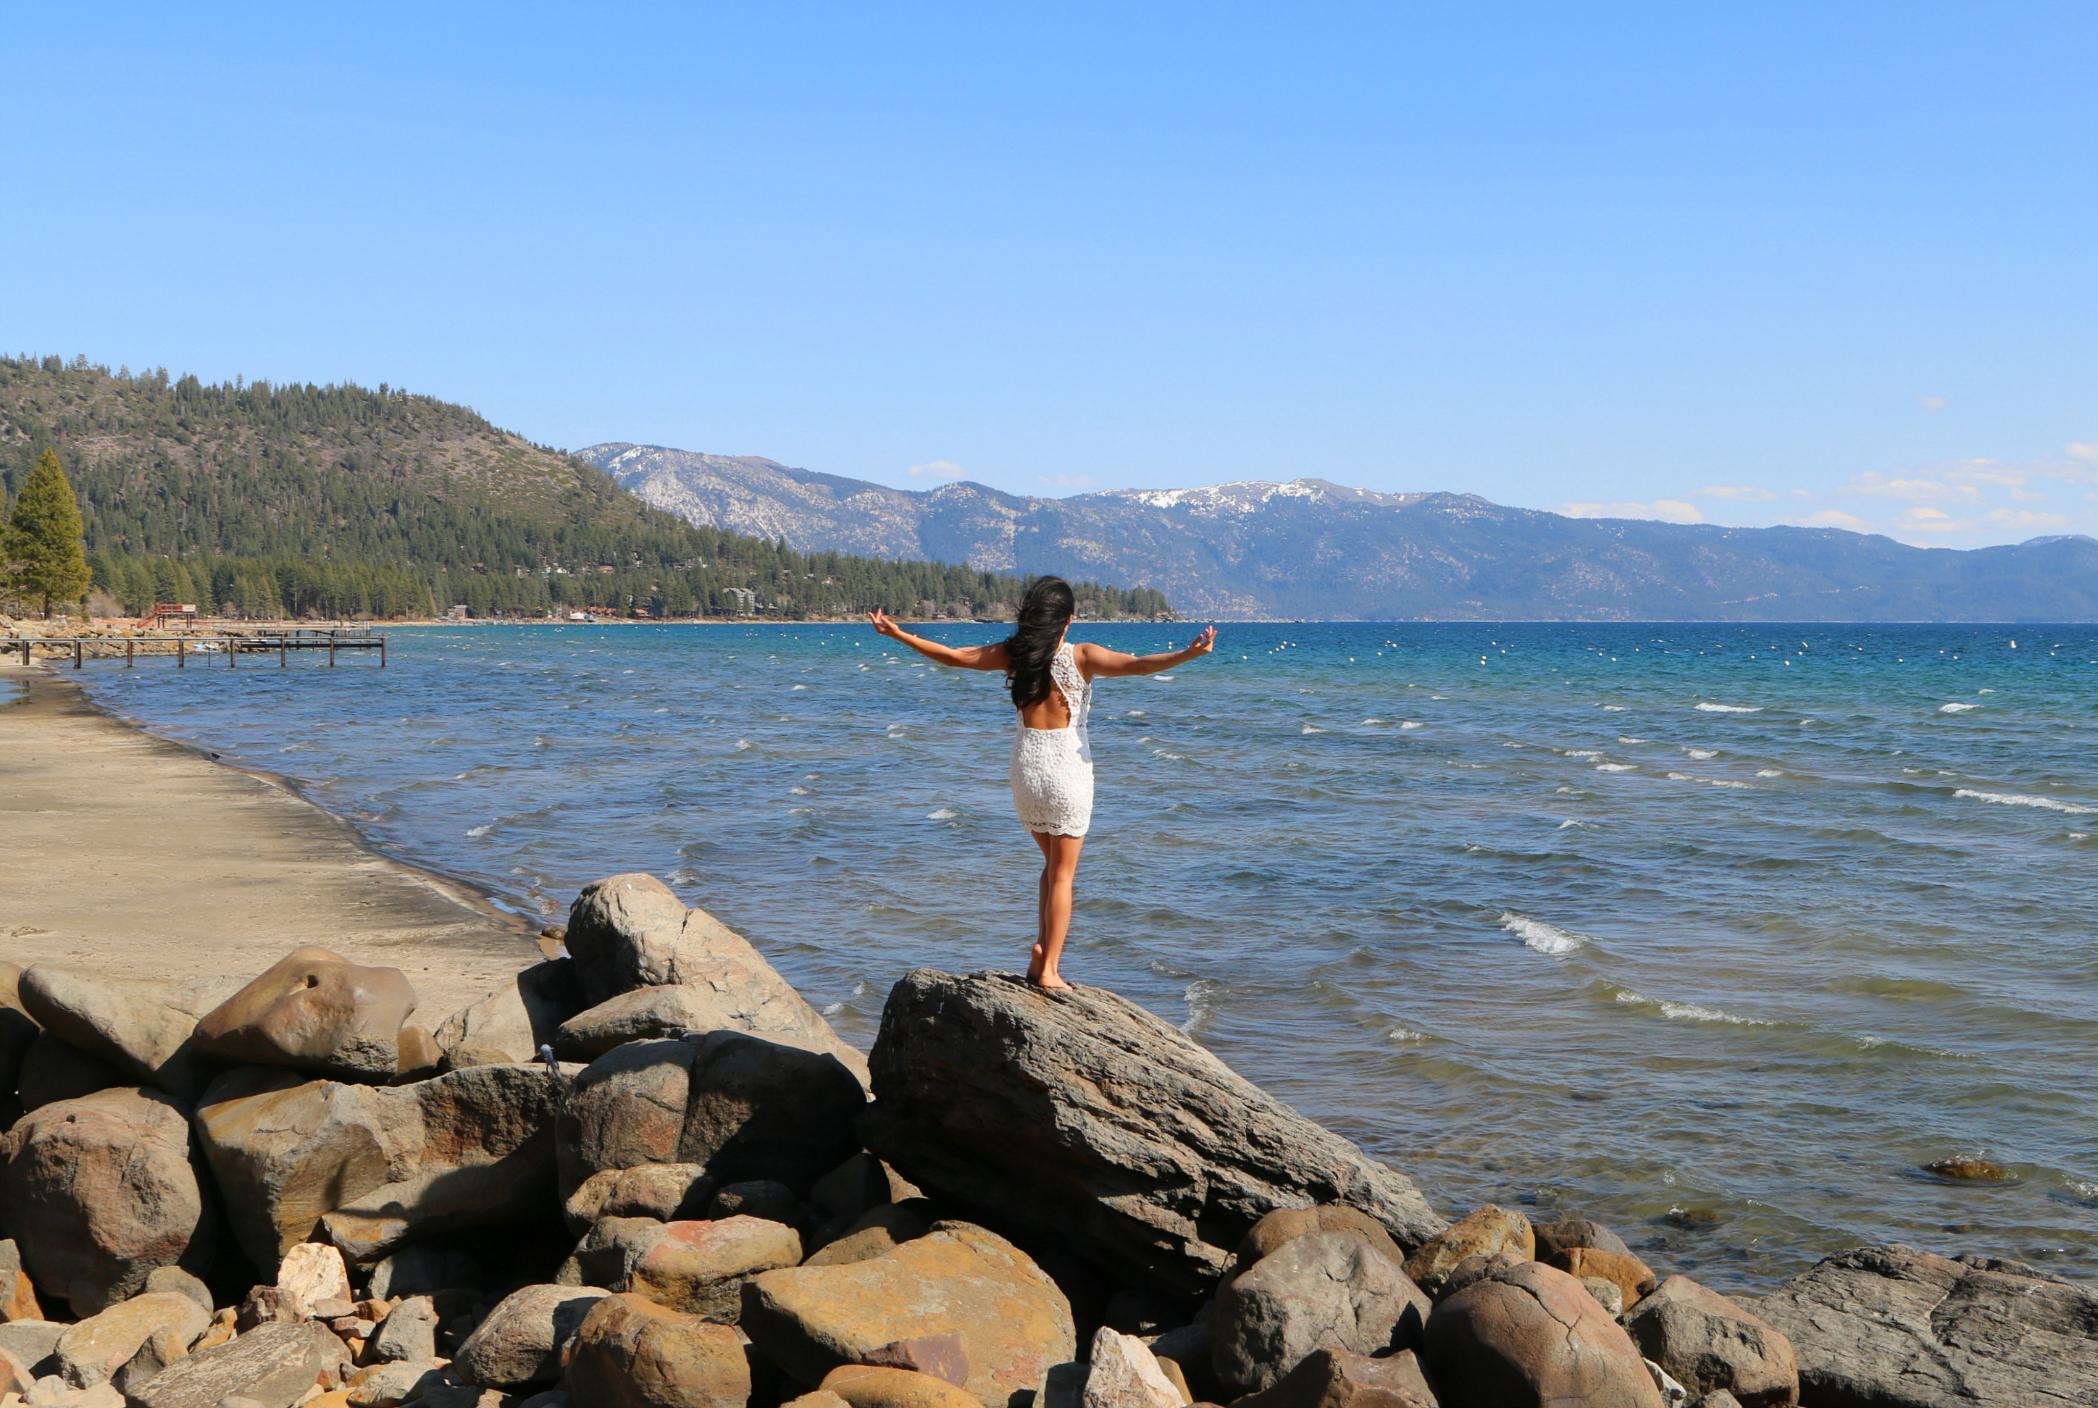 TravelBreak.net - Tahoe and Reno will blow your mind